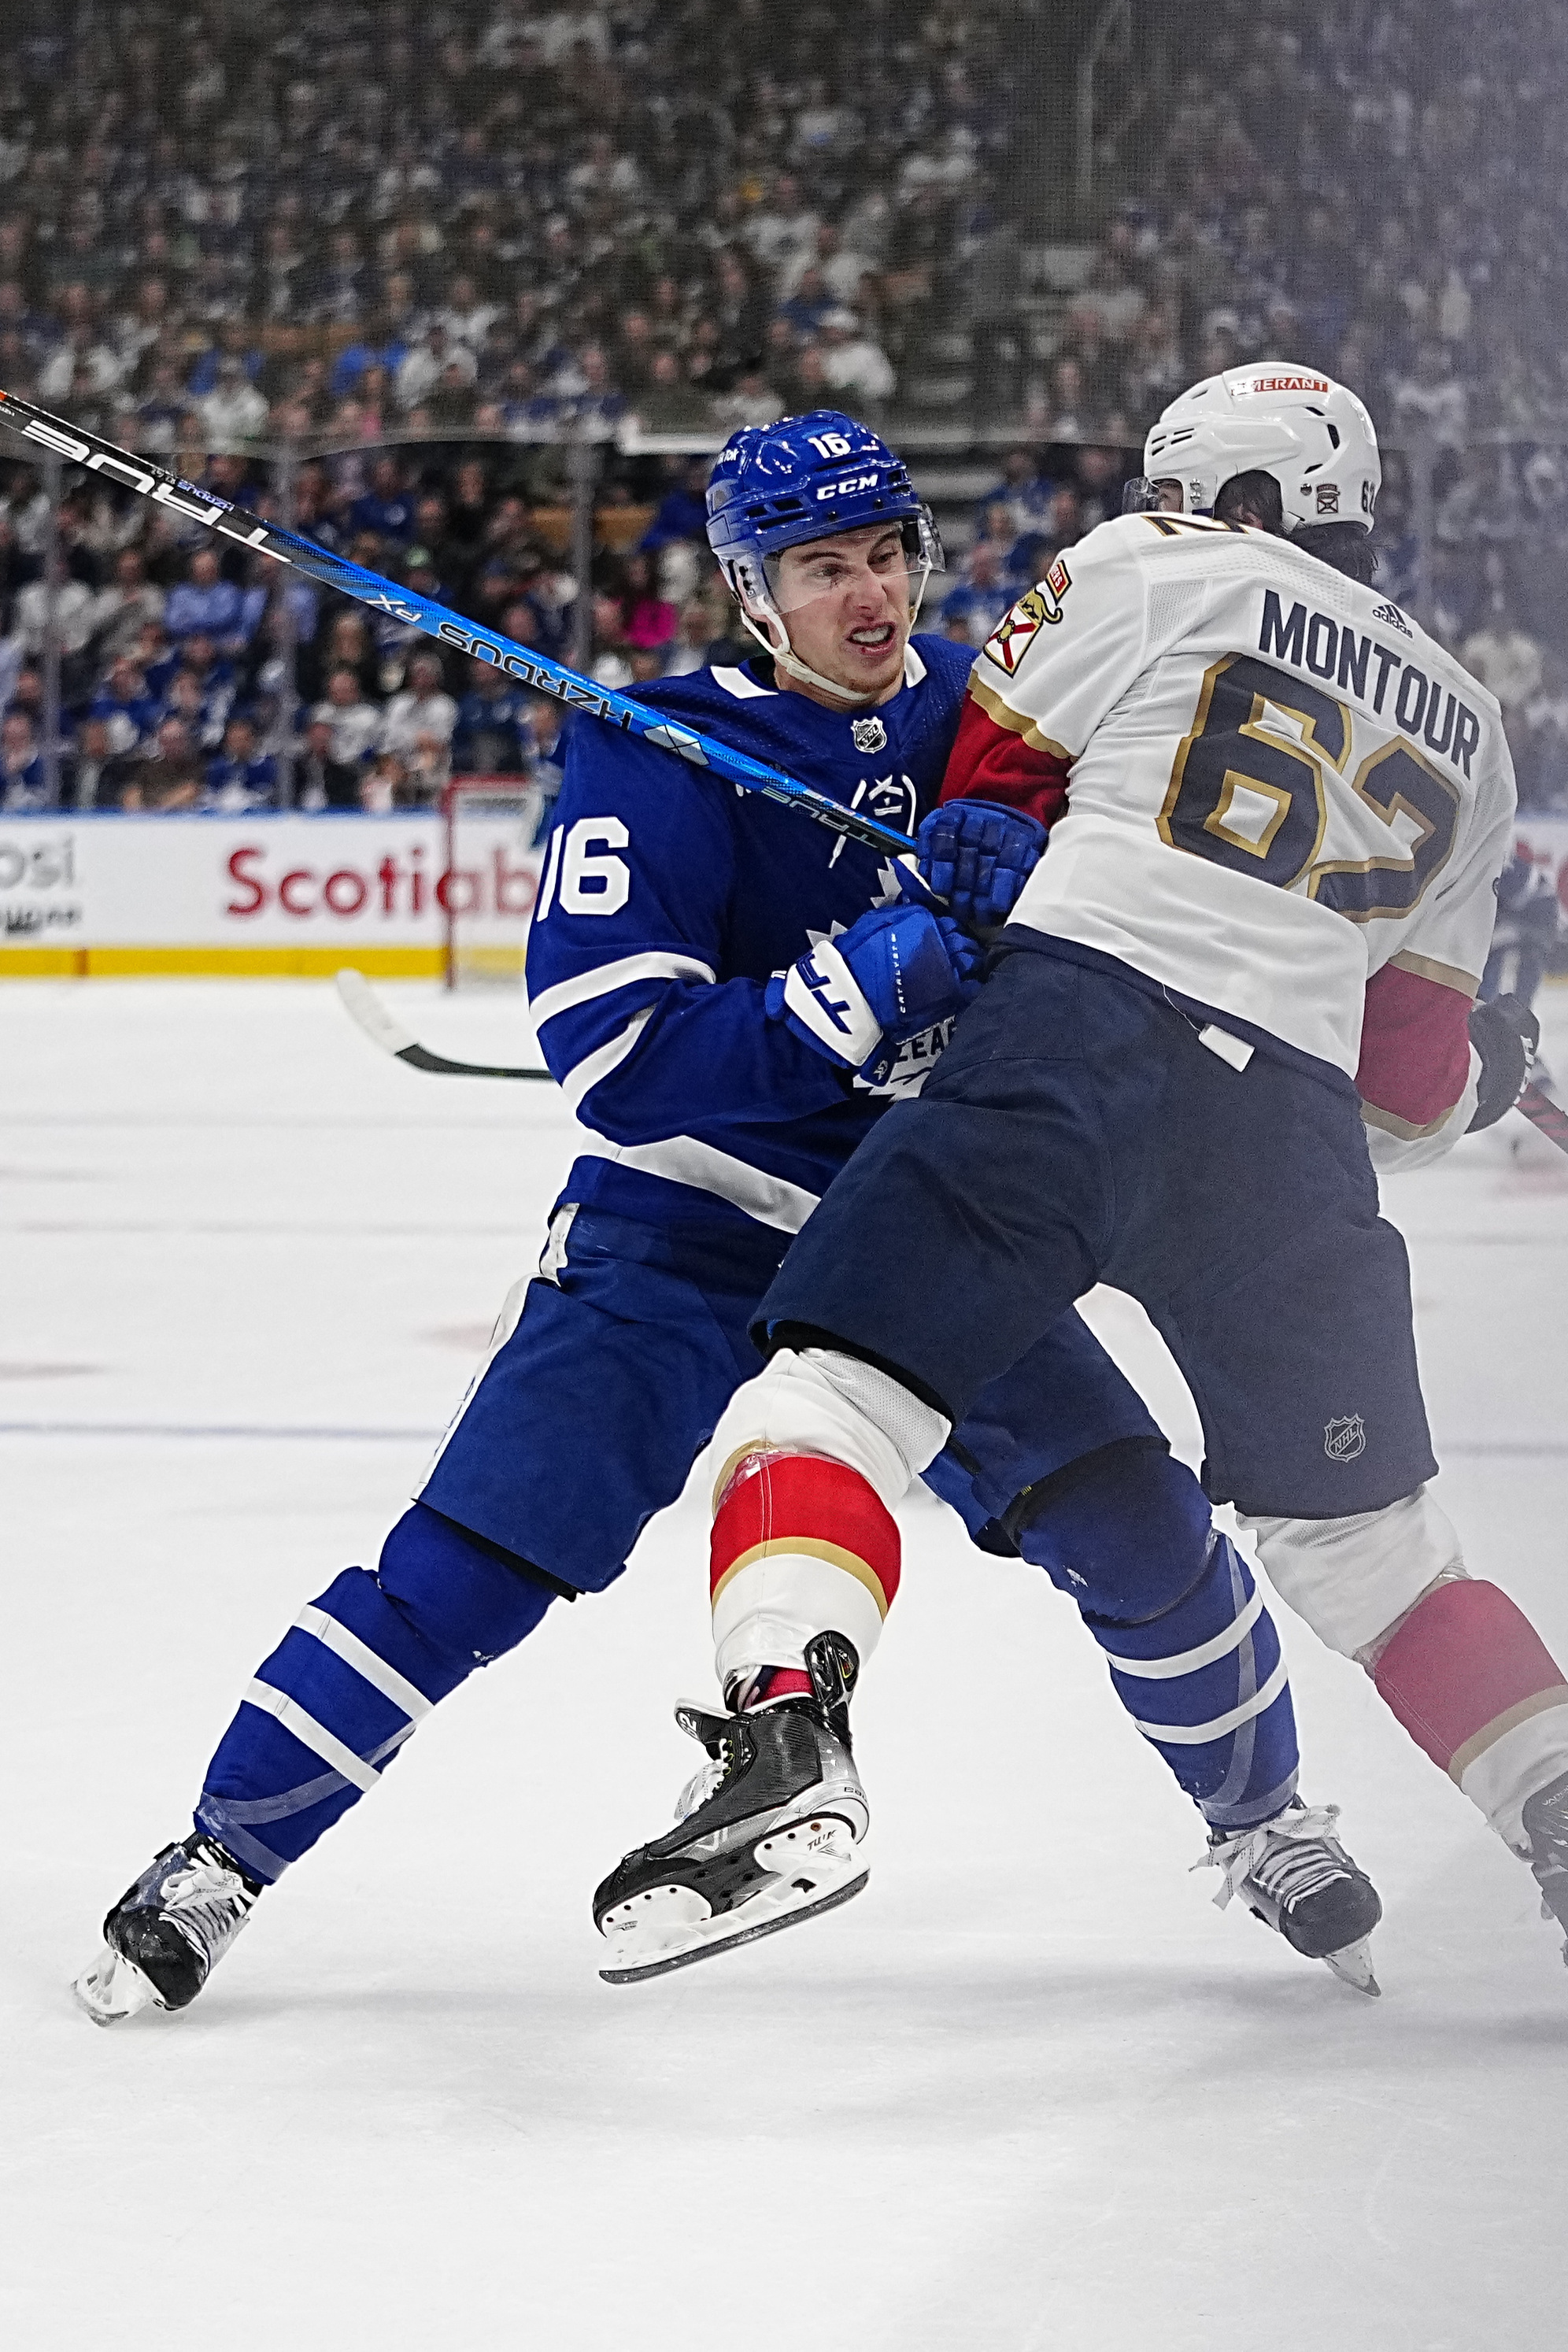 Brown paces Maple Leafs over Panthers 